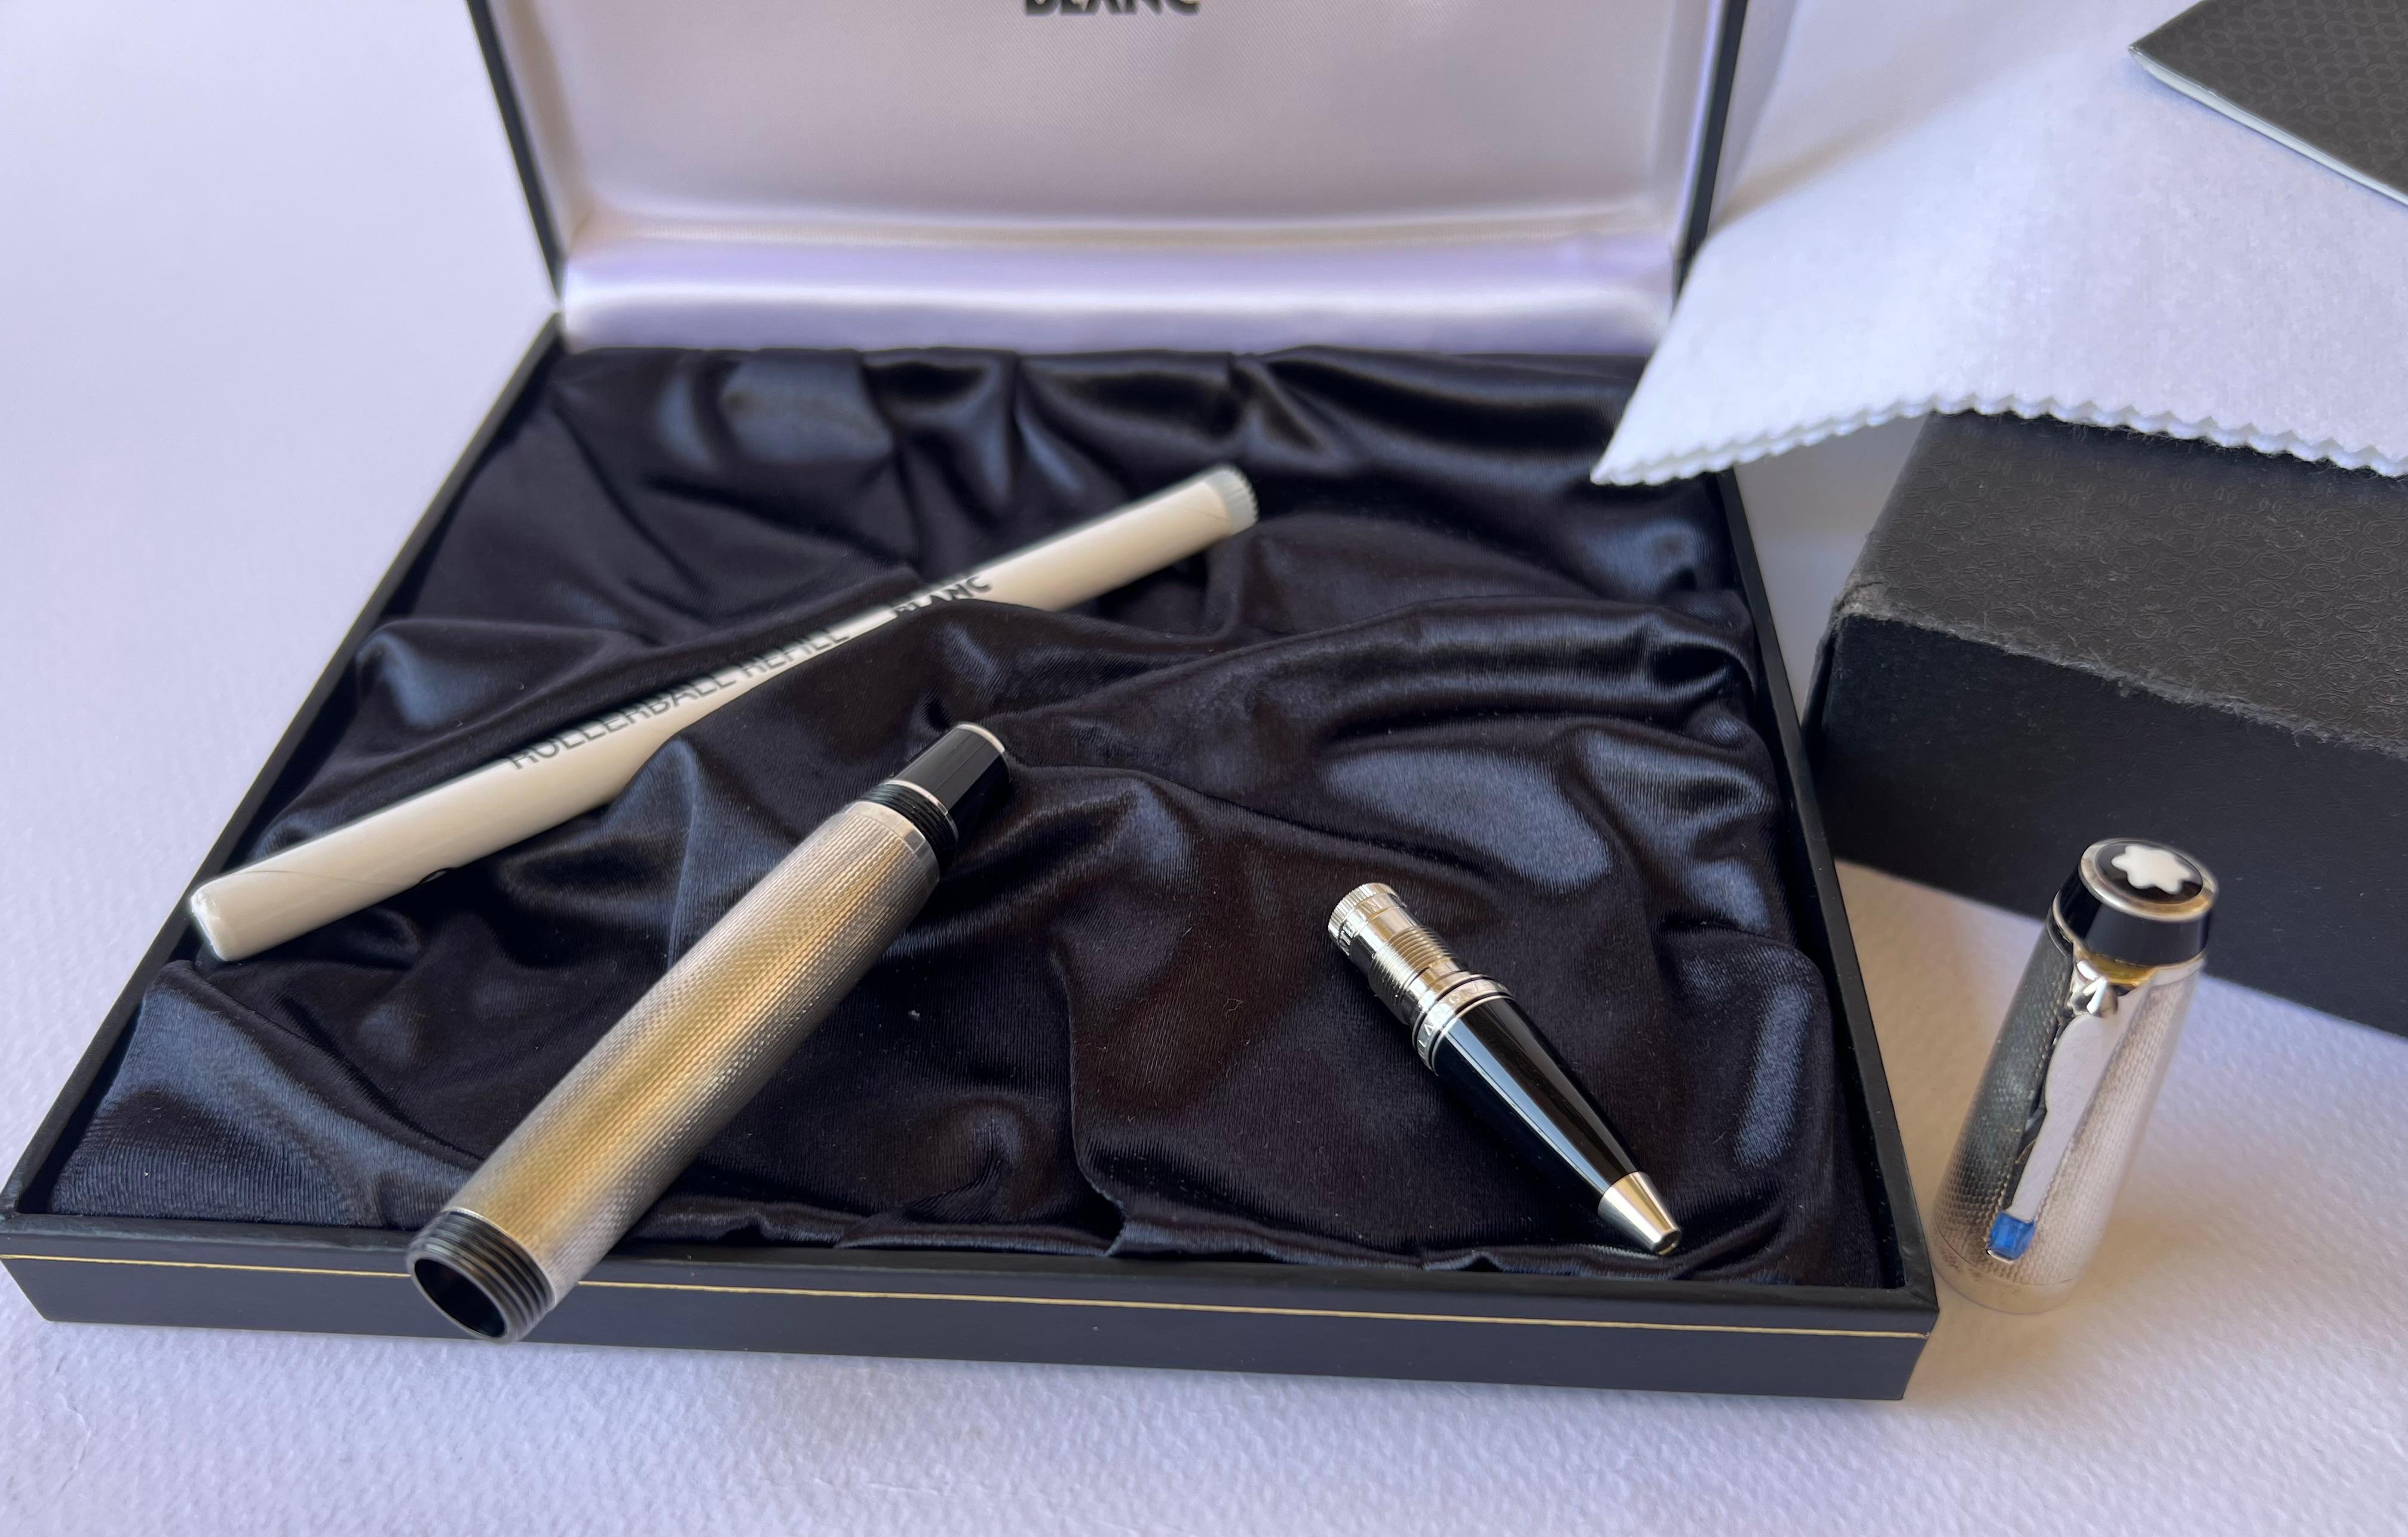  For your consideration Montblanc Boheme Ag925 Sterling Silver Roller Ball Pen Full Set

Package Contain Montblanc Boheme Sterling Silver Sapphire Pen

Genuine Box

Outer Packaging

Cloth


Details:

Condition : Never Used In Excellent Like New